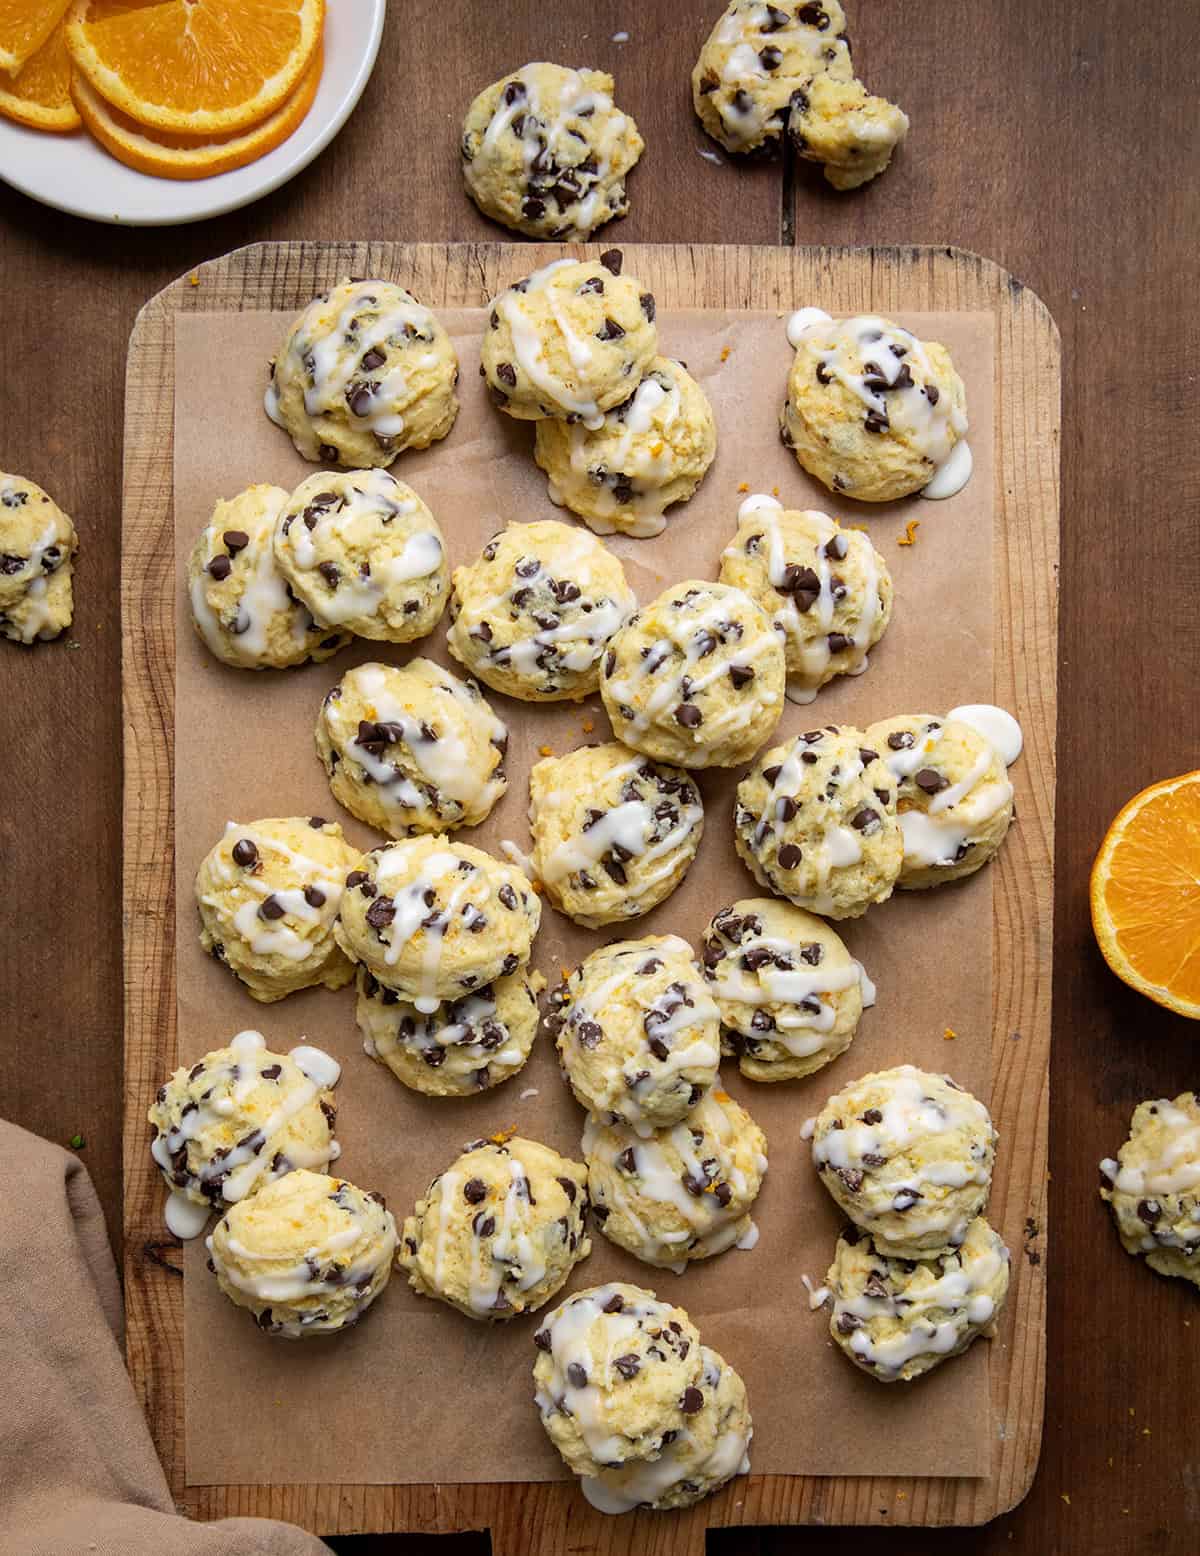 Orange Chocolate Chip Ricotta Cookies on a wooden table with oranges from overhead.